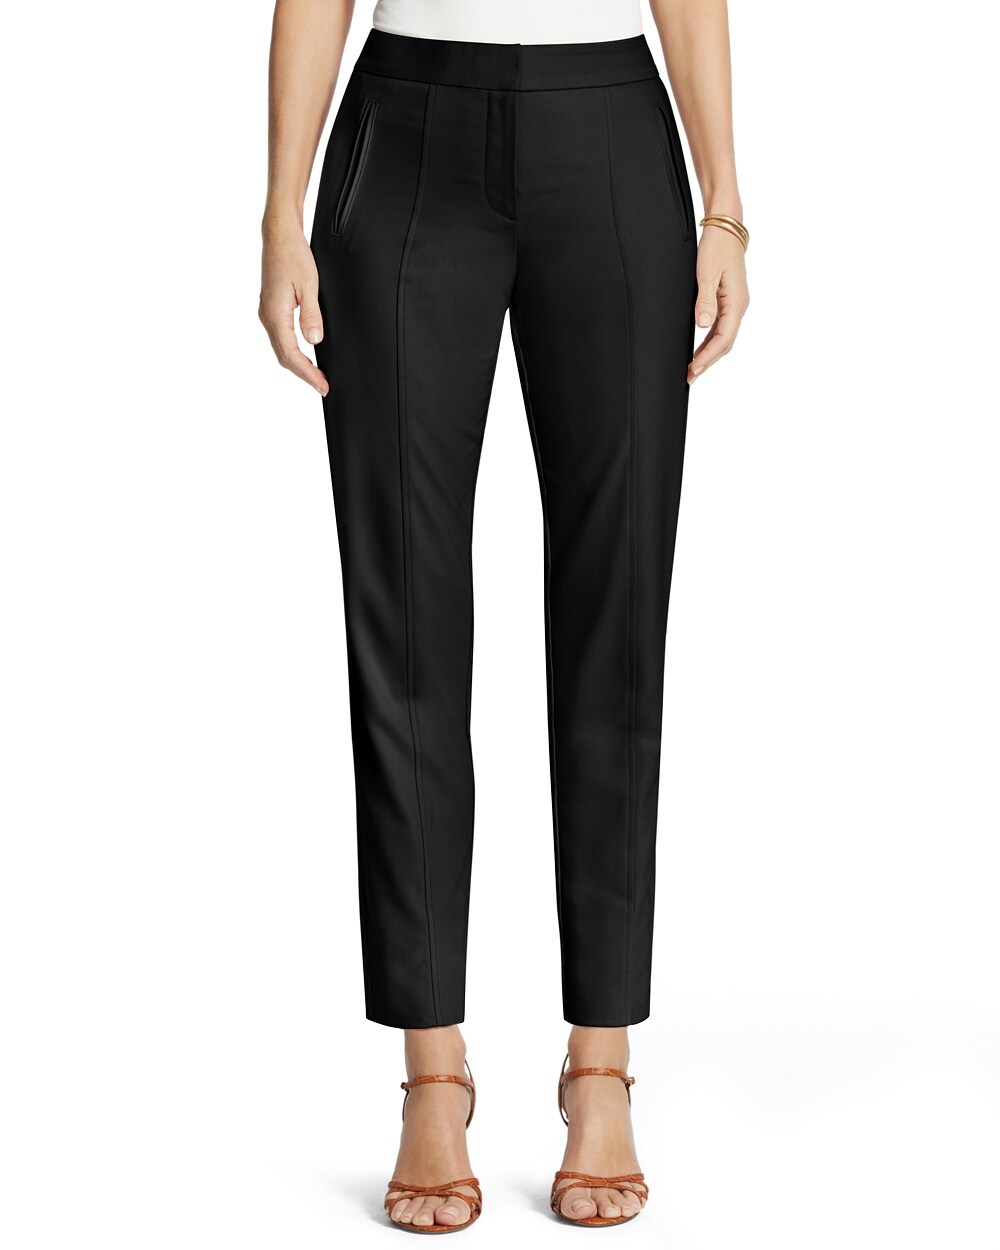 So Slimming Audrey Ankle Pants